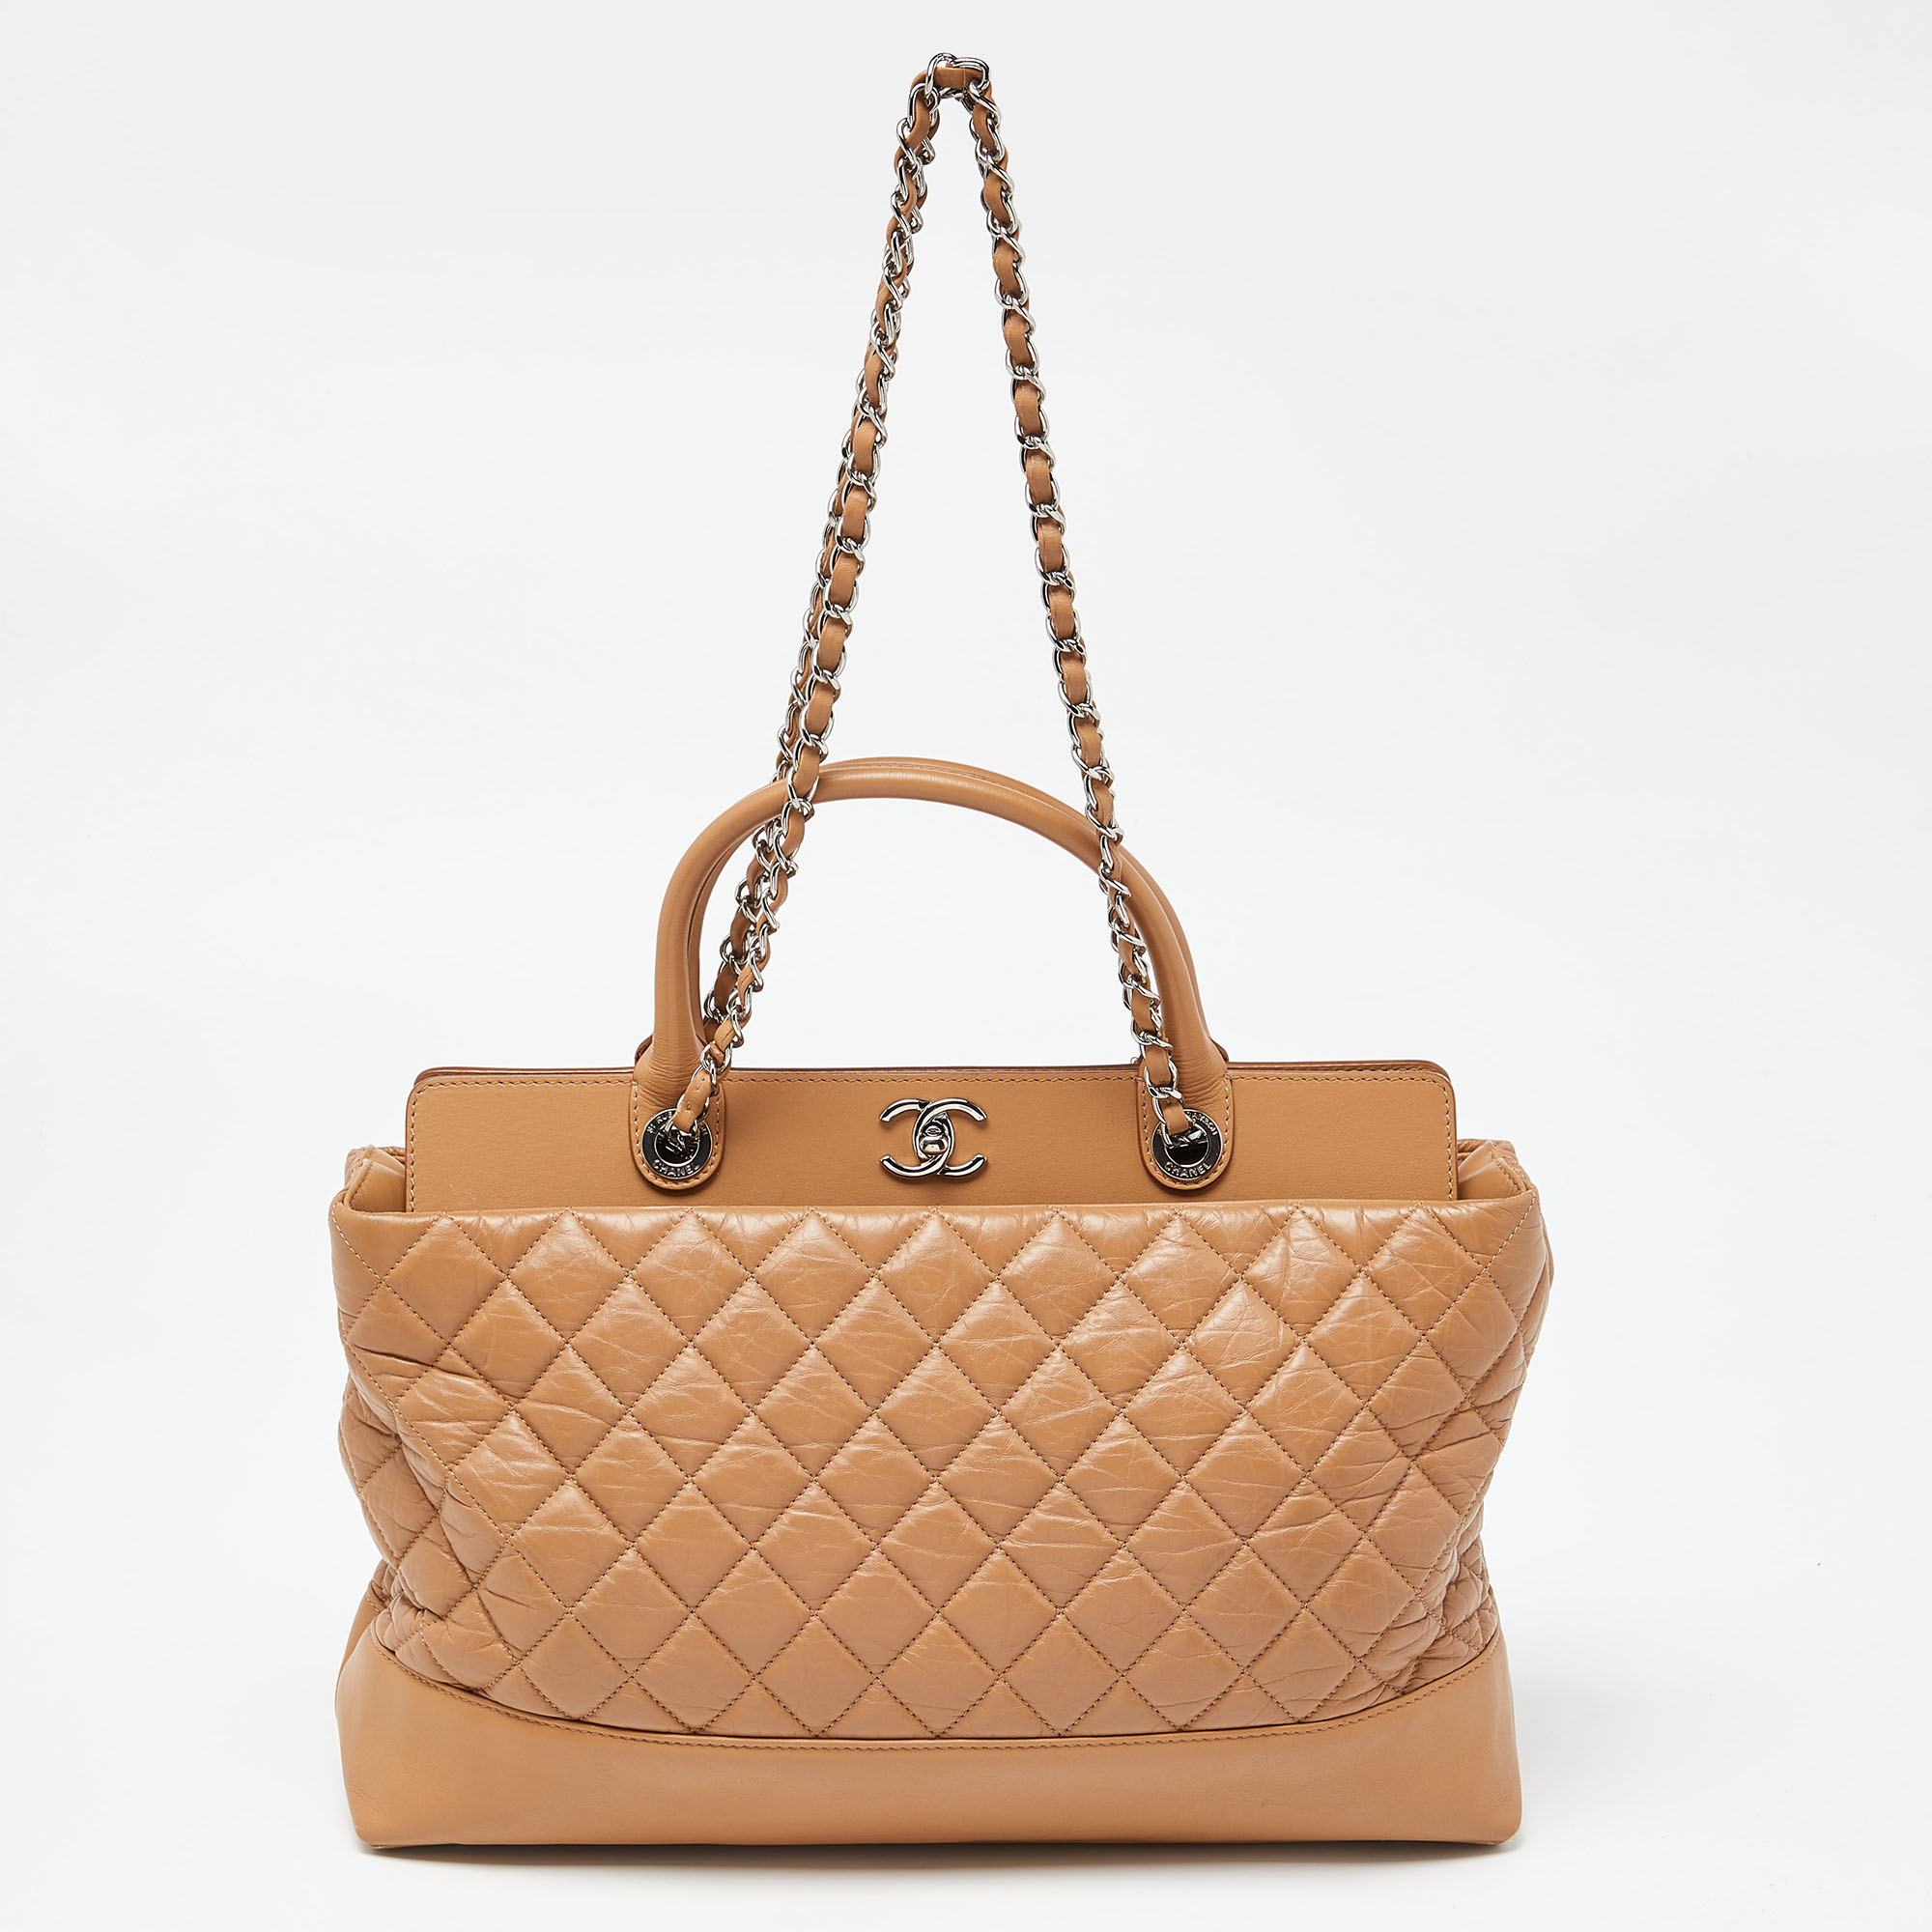 

Chanel Beige Quilted Leather CC Shopper Tote